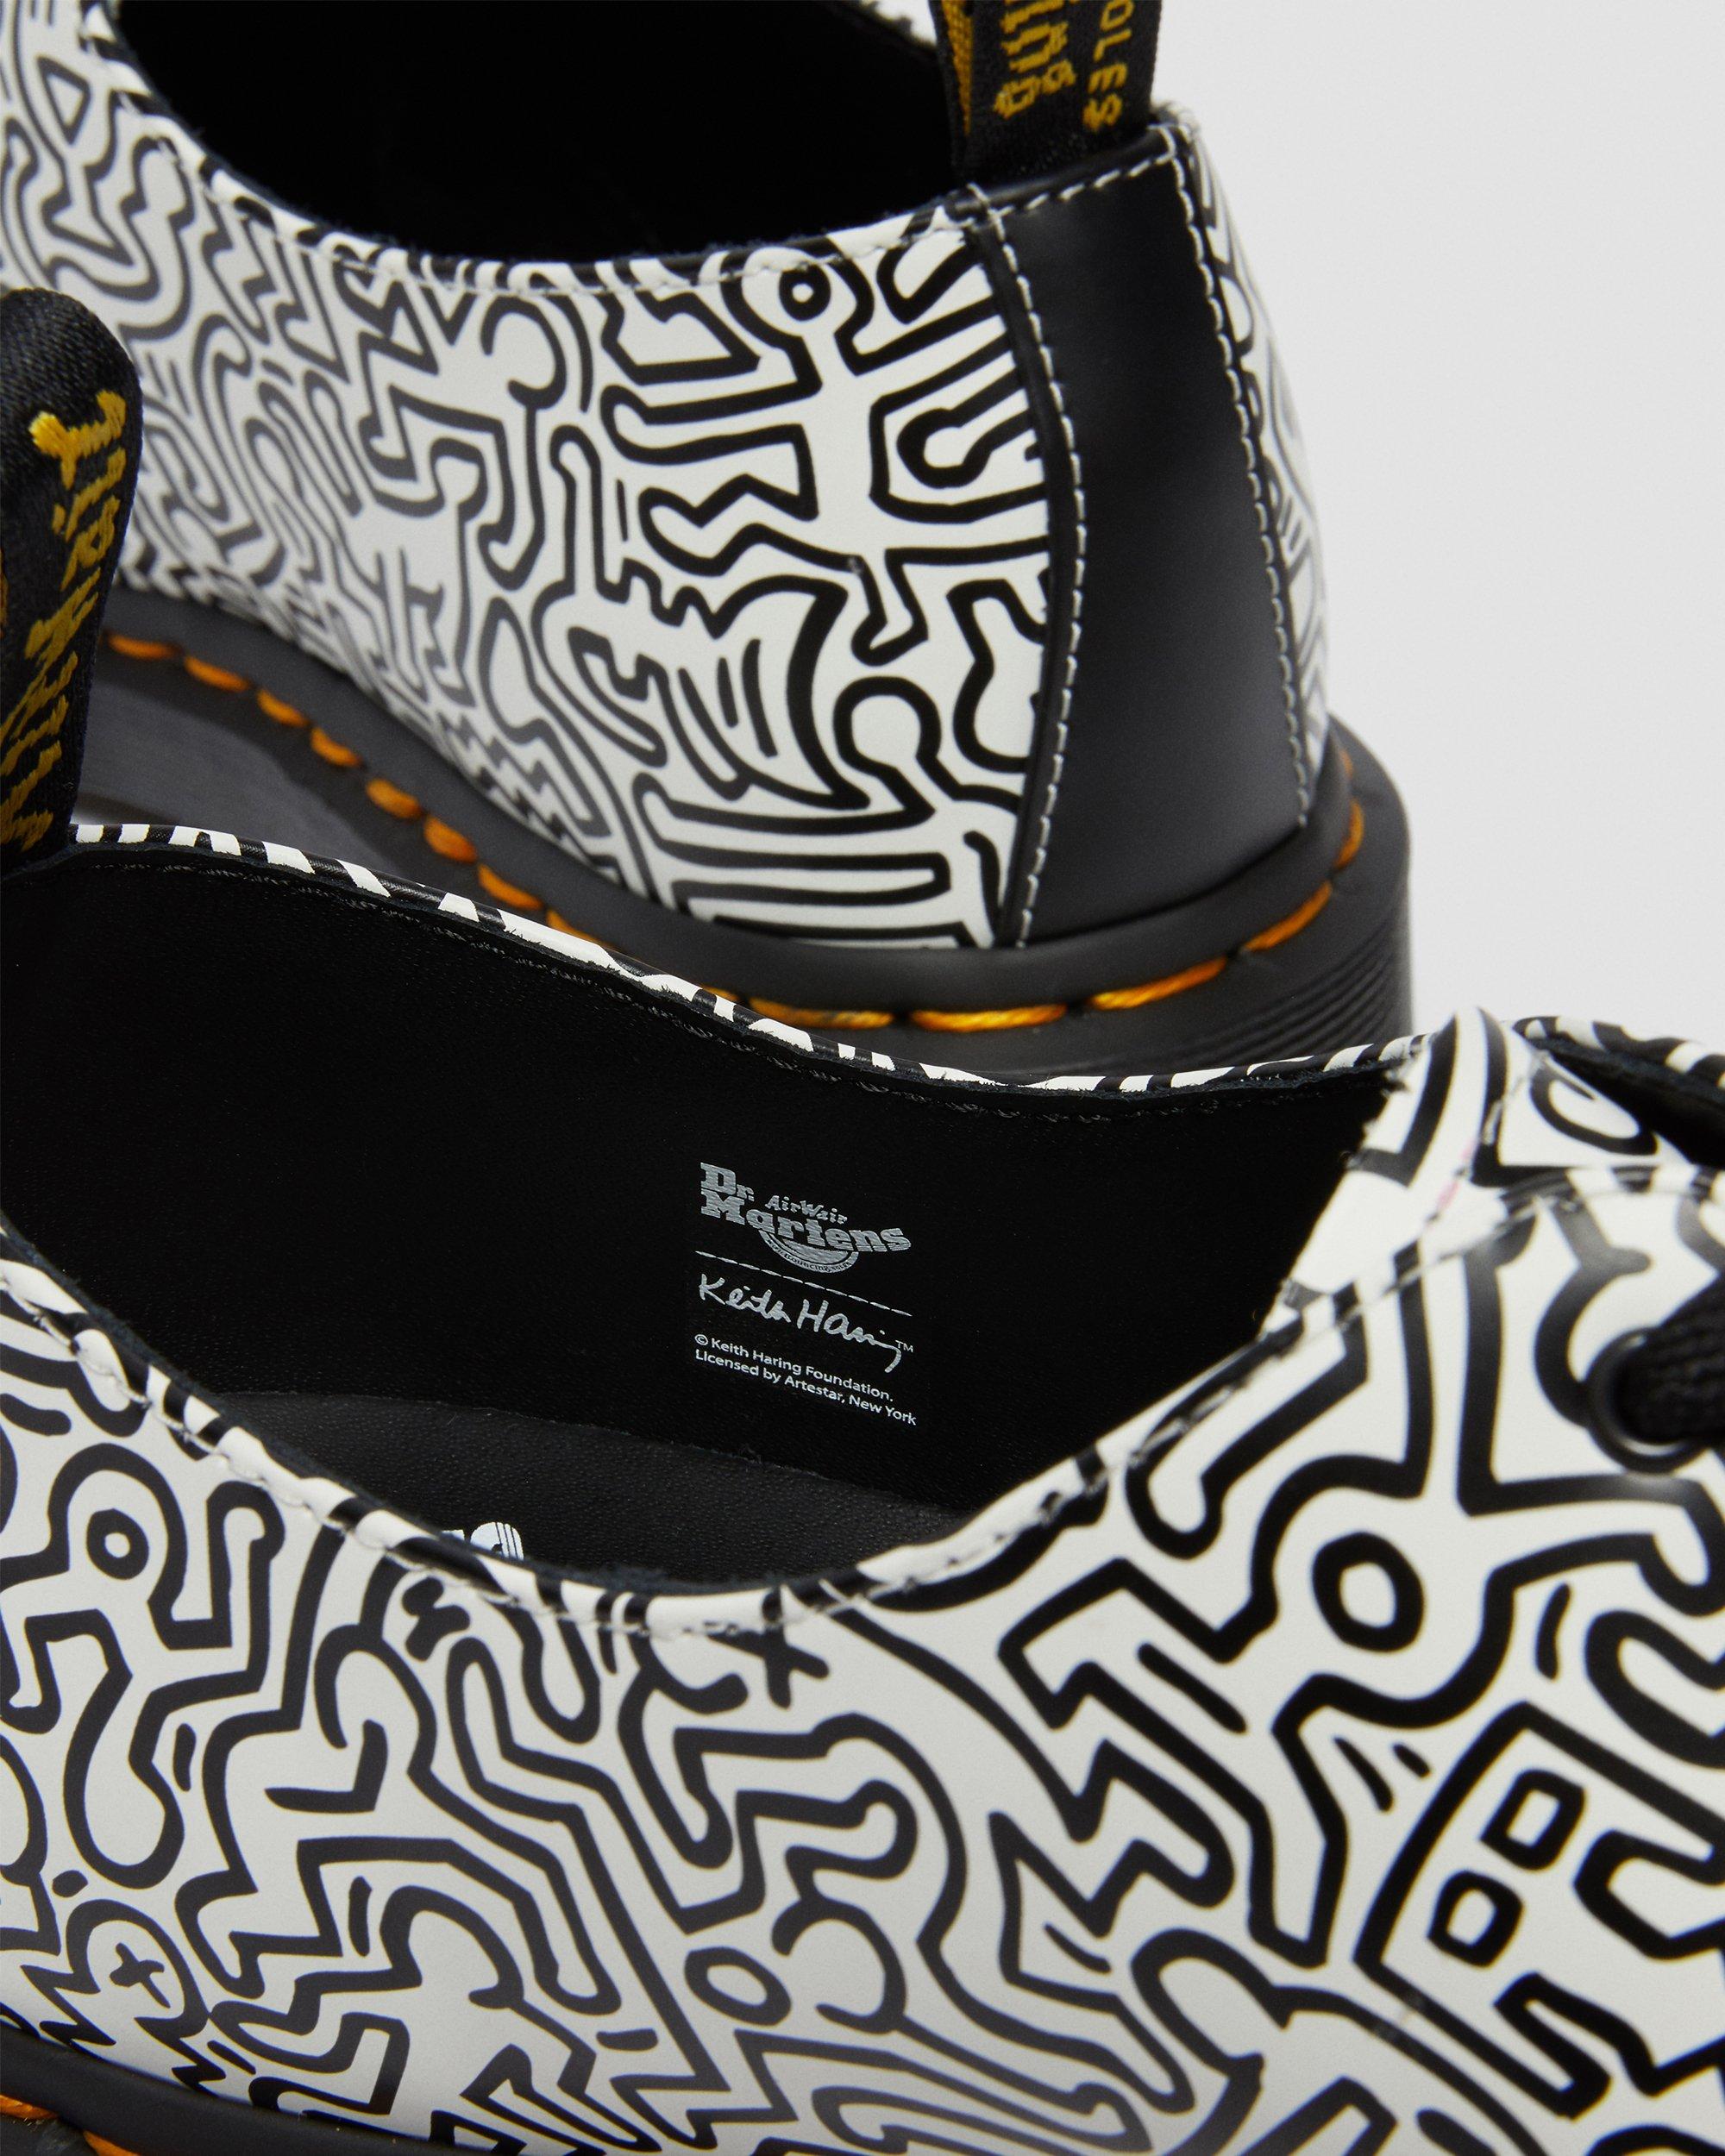 https://i1.adis.ws/i/drmartens/26833009.88.jpg?$large$Keith Haring 1461 Printed Leather Oxford Shoes Dr. Martens